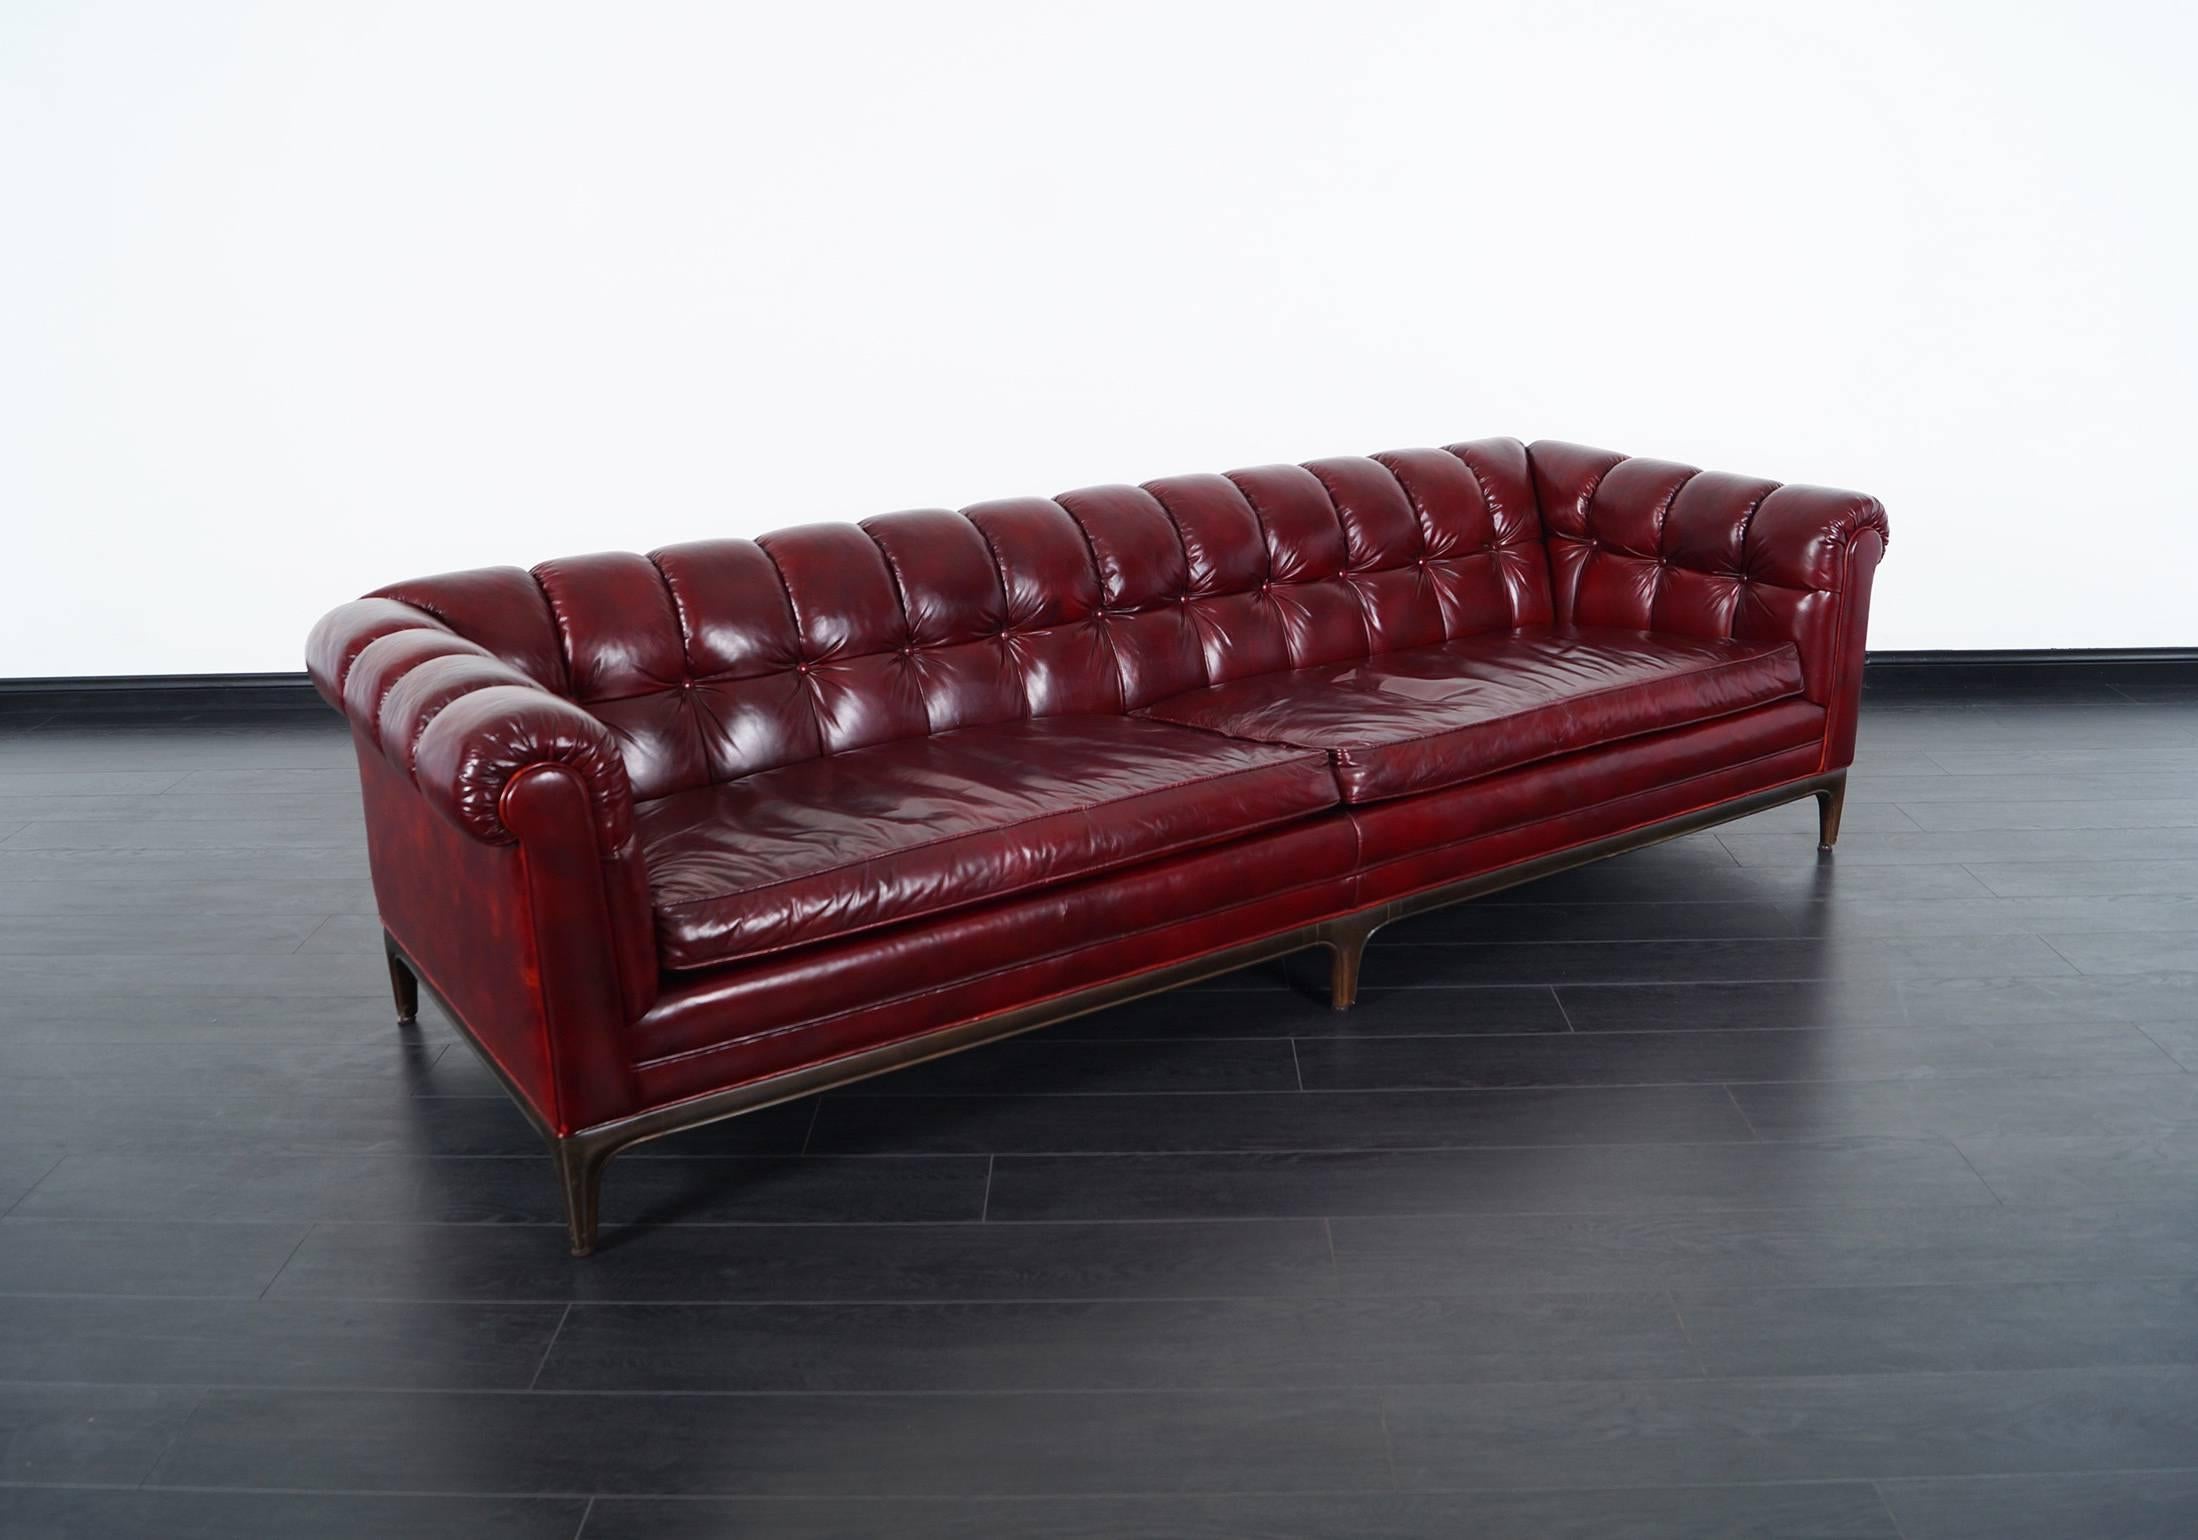 Stunning vintage biscuit tufted leather sofa designed by Maurice Bailey for Monteverdi Young in United States, circa 1960s. This remarkable sofa features a solid walnut sculptural base and its original leathery upholstery displaying a beautiful